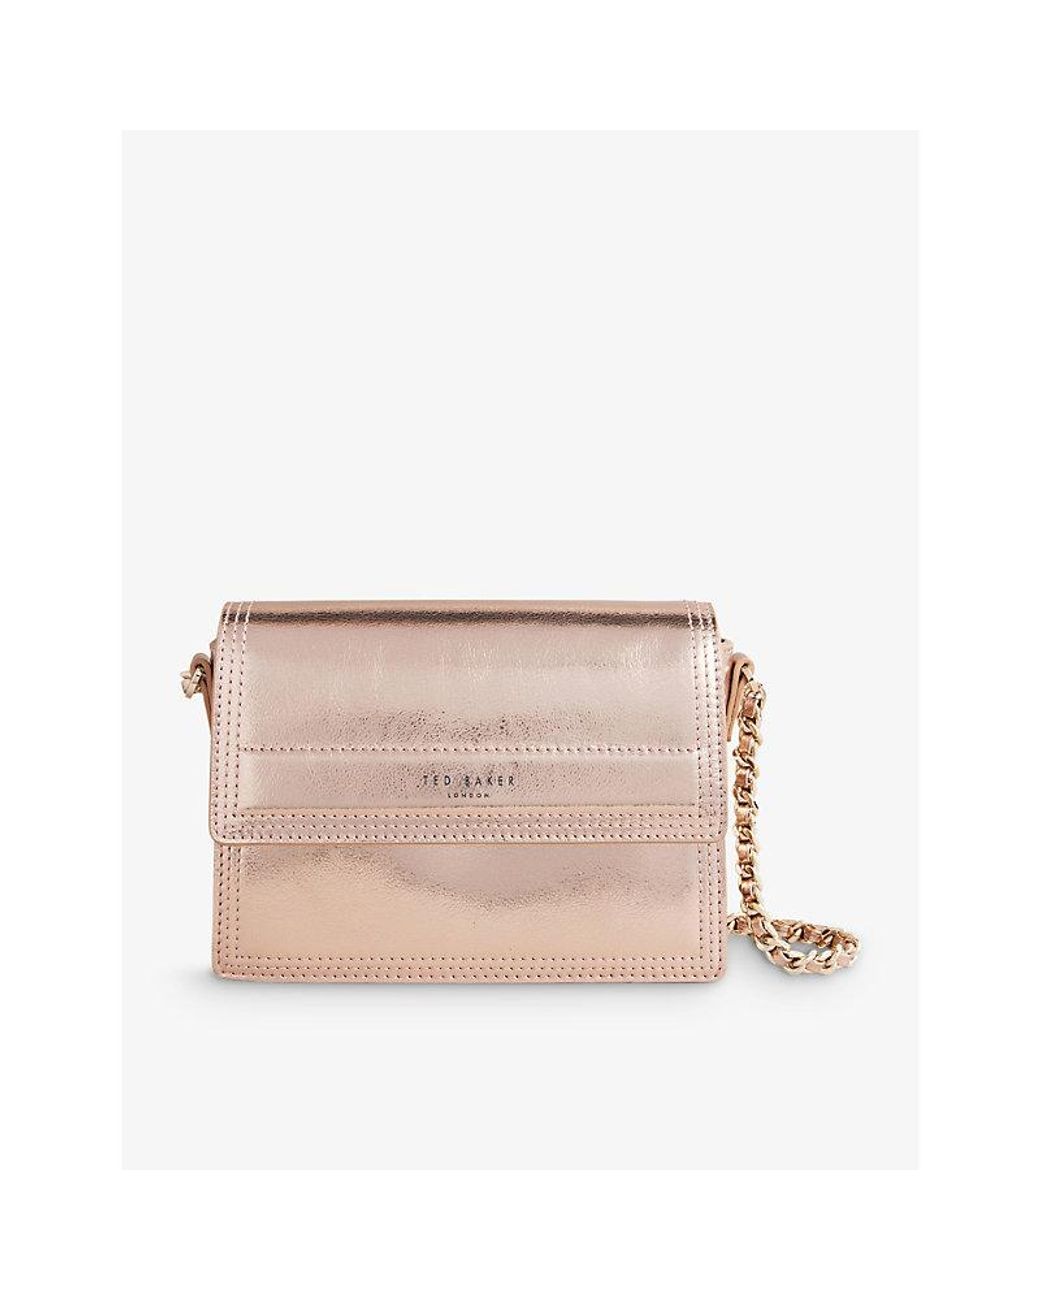 Ted Baker Libbe Leather Crossbody Bag in Pink